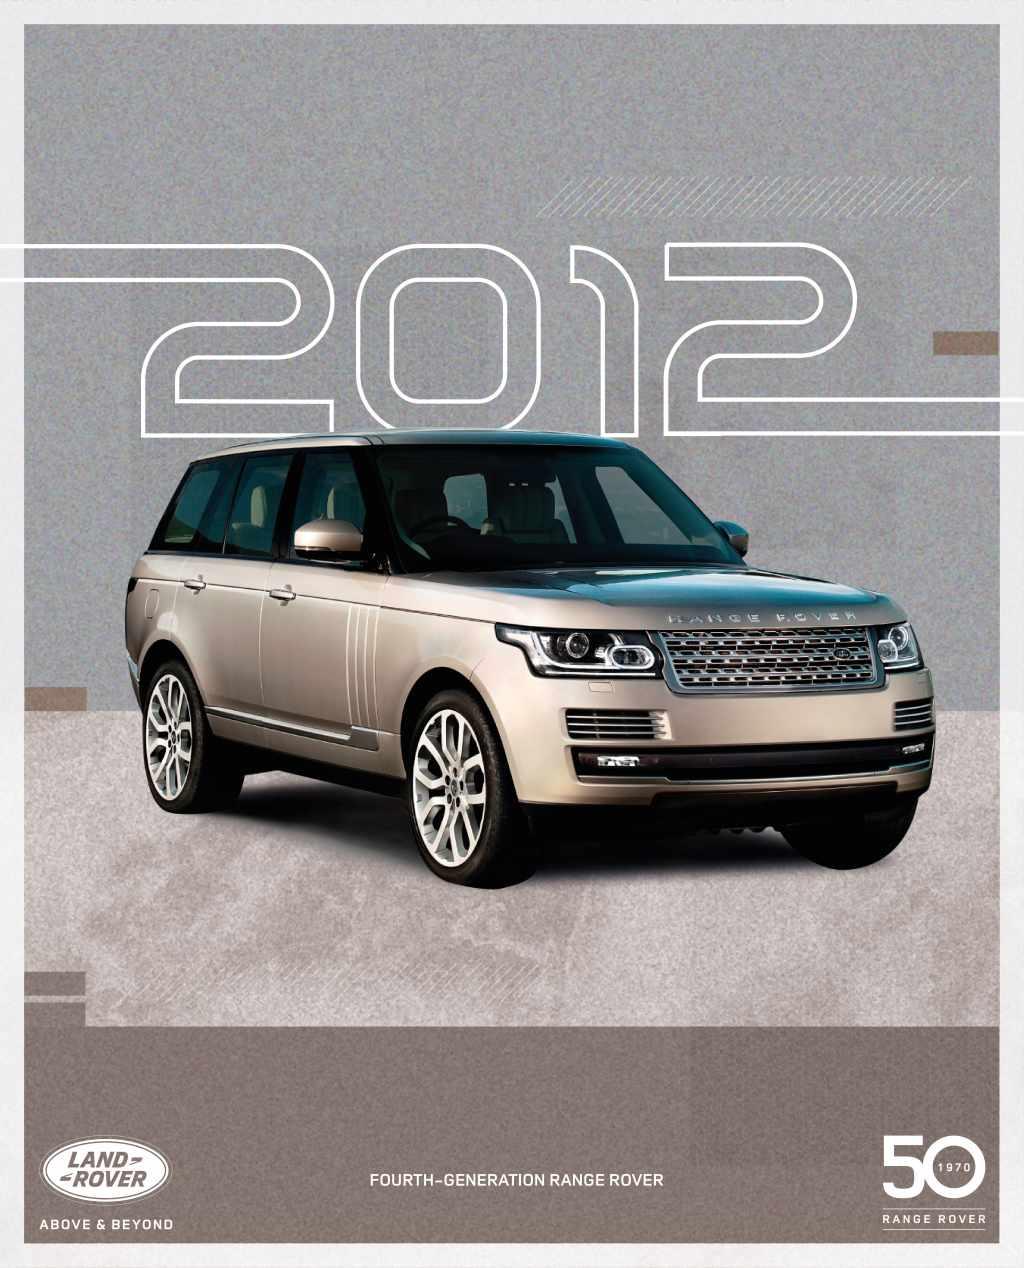 No one likes to hear that their vehicle is being recalled, it’s a good thing Land Rover is taking care of it.